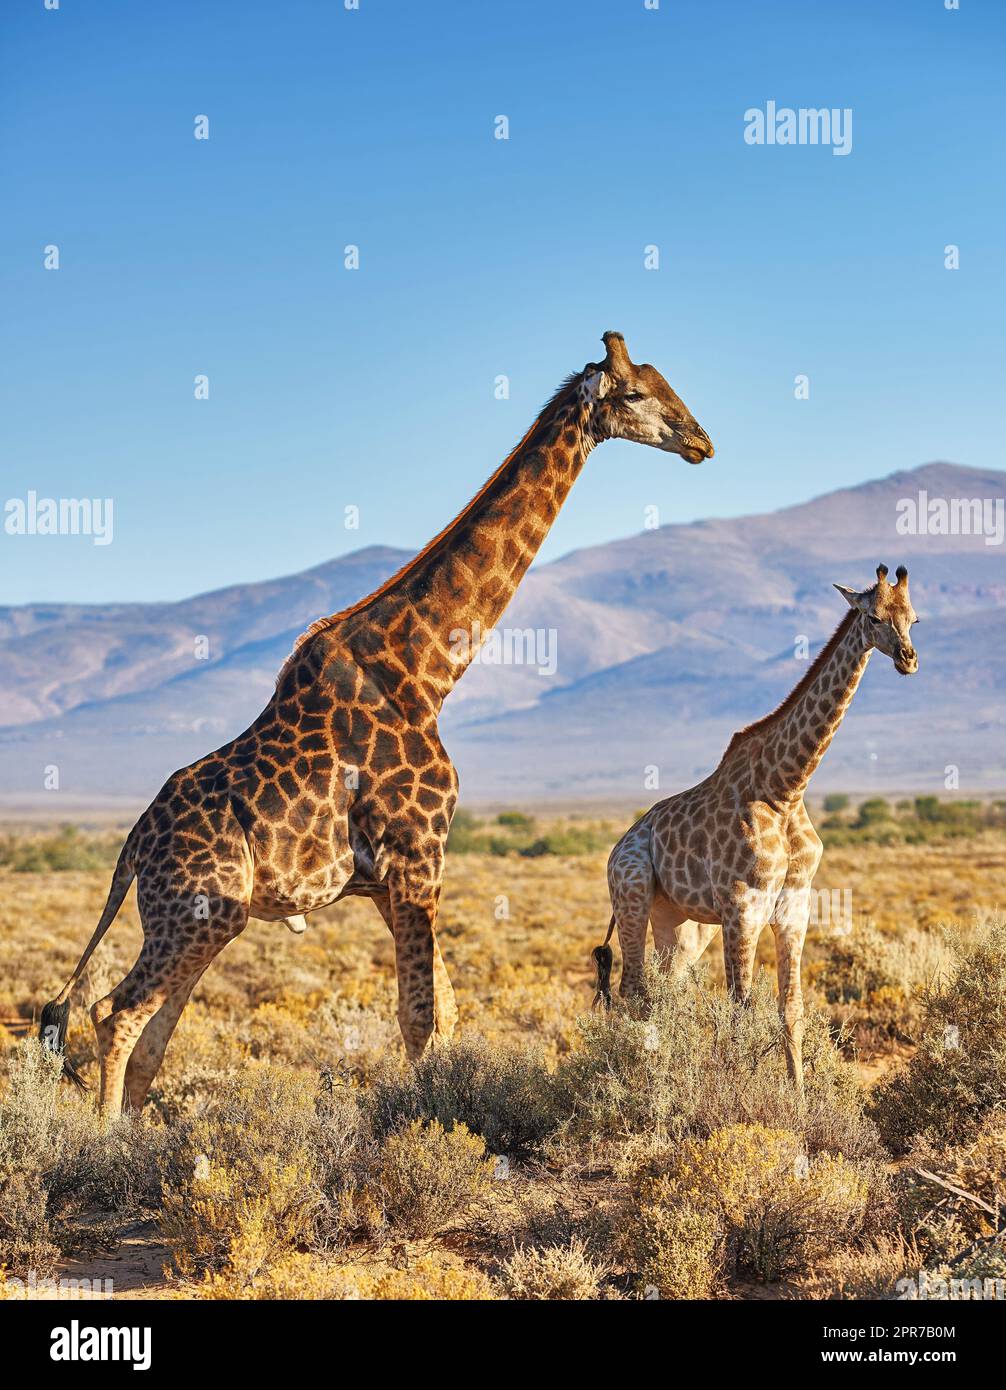 Giraffes in Savanna in safari on hot, sunny summer day. Wilderness of nature full of light brown bushes, grass and mountains in background. Wild space in South Africa where animals roam free Stock Photo